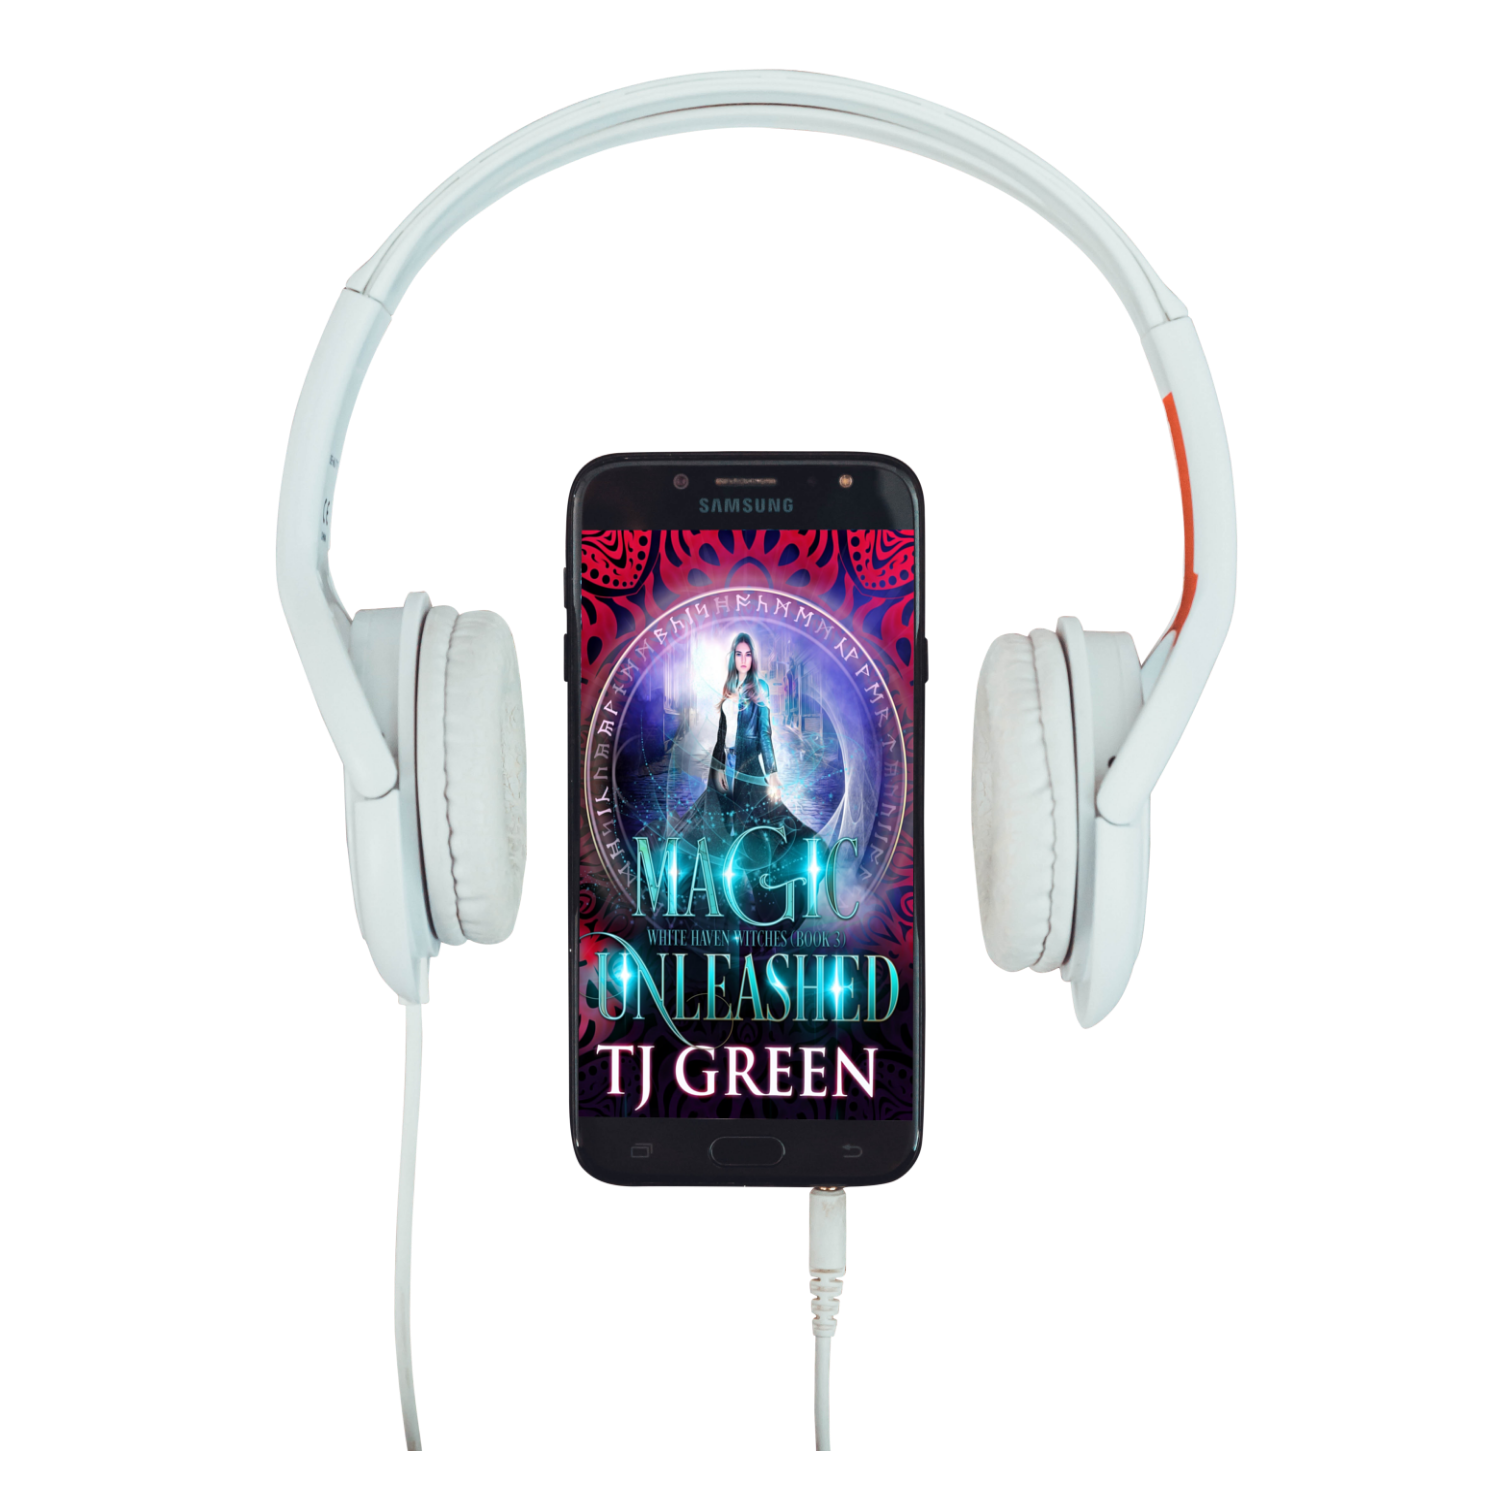 Magic Unleashed Audiobook Paranormal Mystery